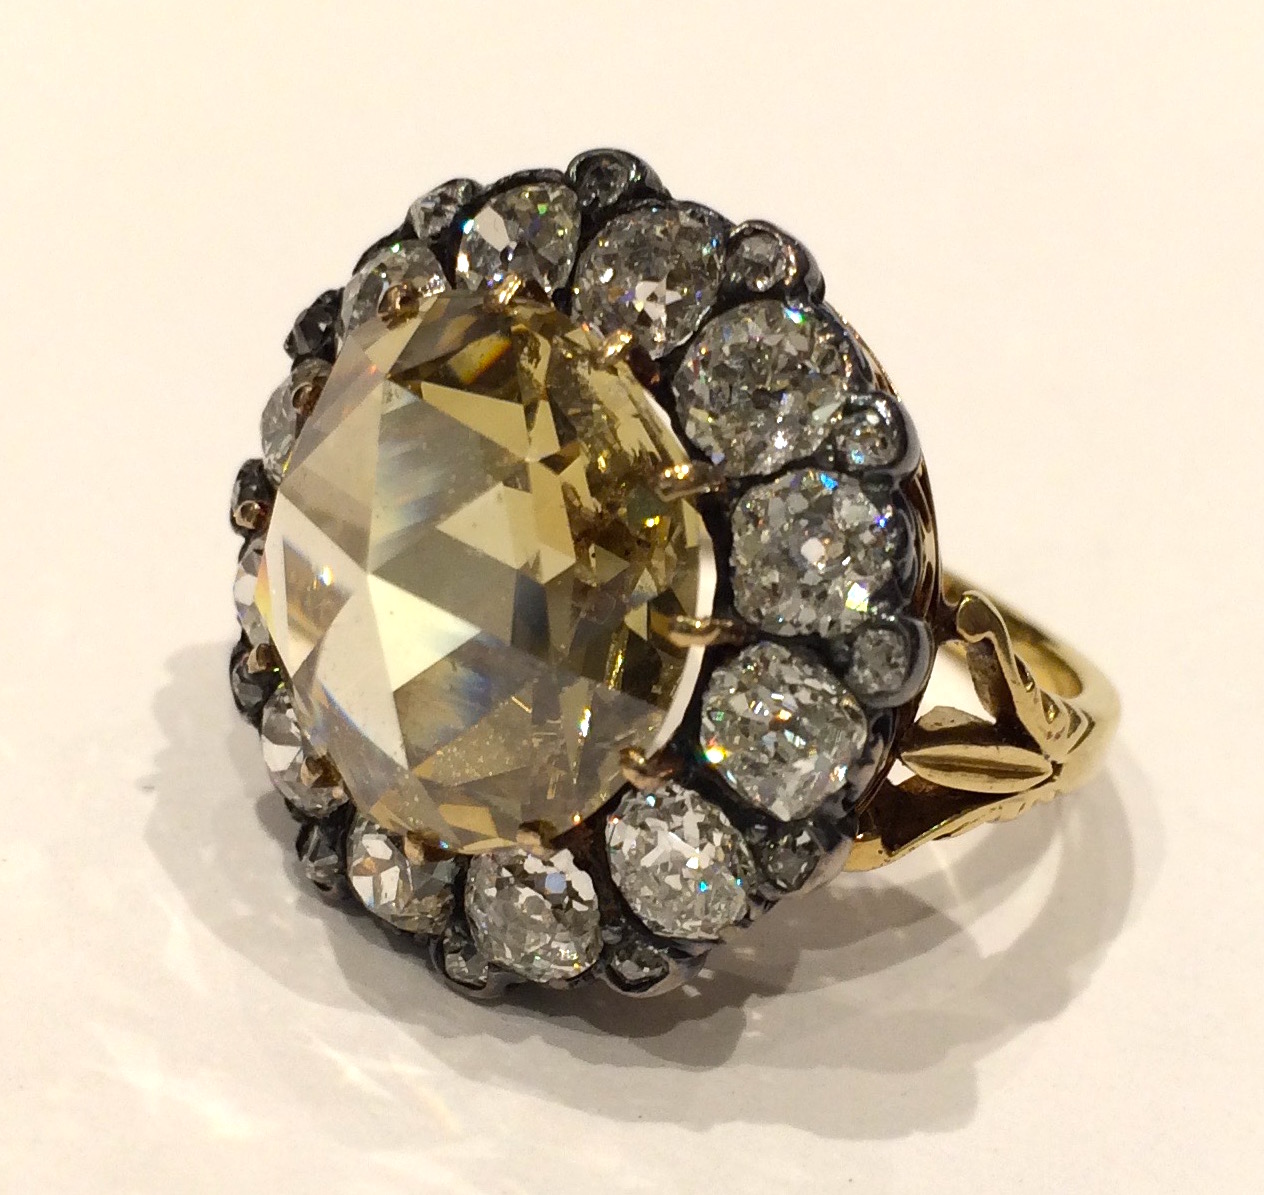 Champagne “Mughal” Diamond ring, Round rose cut fancy light to fancy brownish yellow natural color center diamond (G.I.A. certificate, 5.50 carats) encircled with 12 old mine cut brilliant diamonds (G.I.A. certificate, near colorless approx. 8 carats TW) and 12 small round old mine cut diamonds all set in white and yellow gold, mid 19th Century